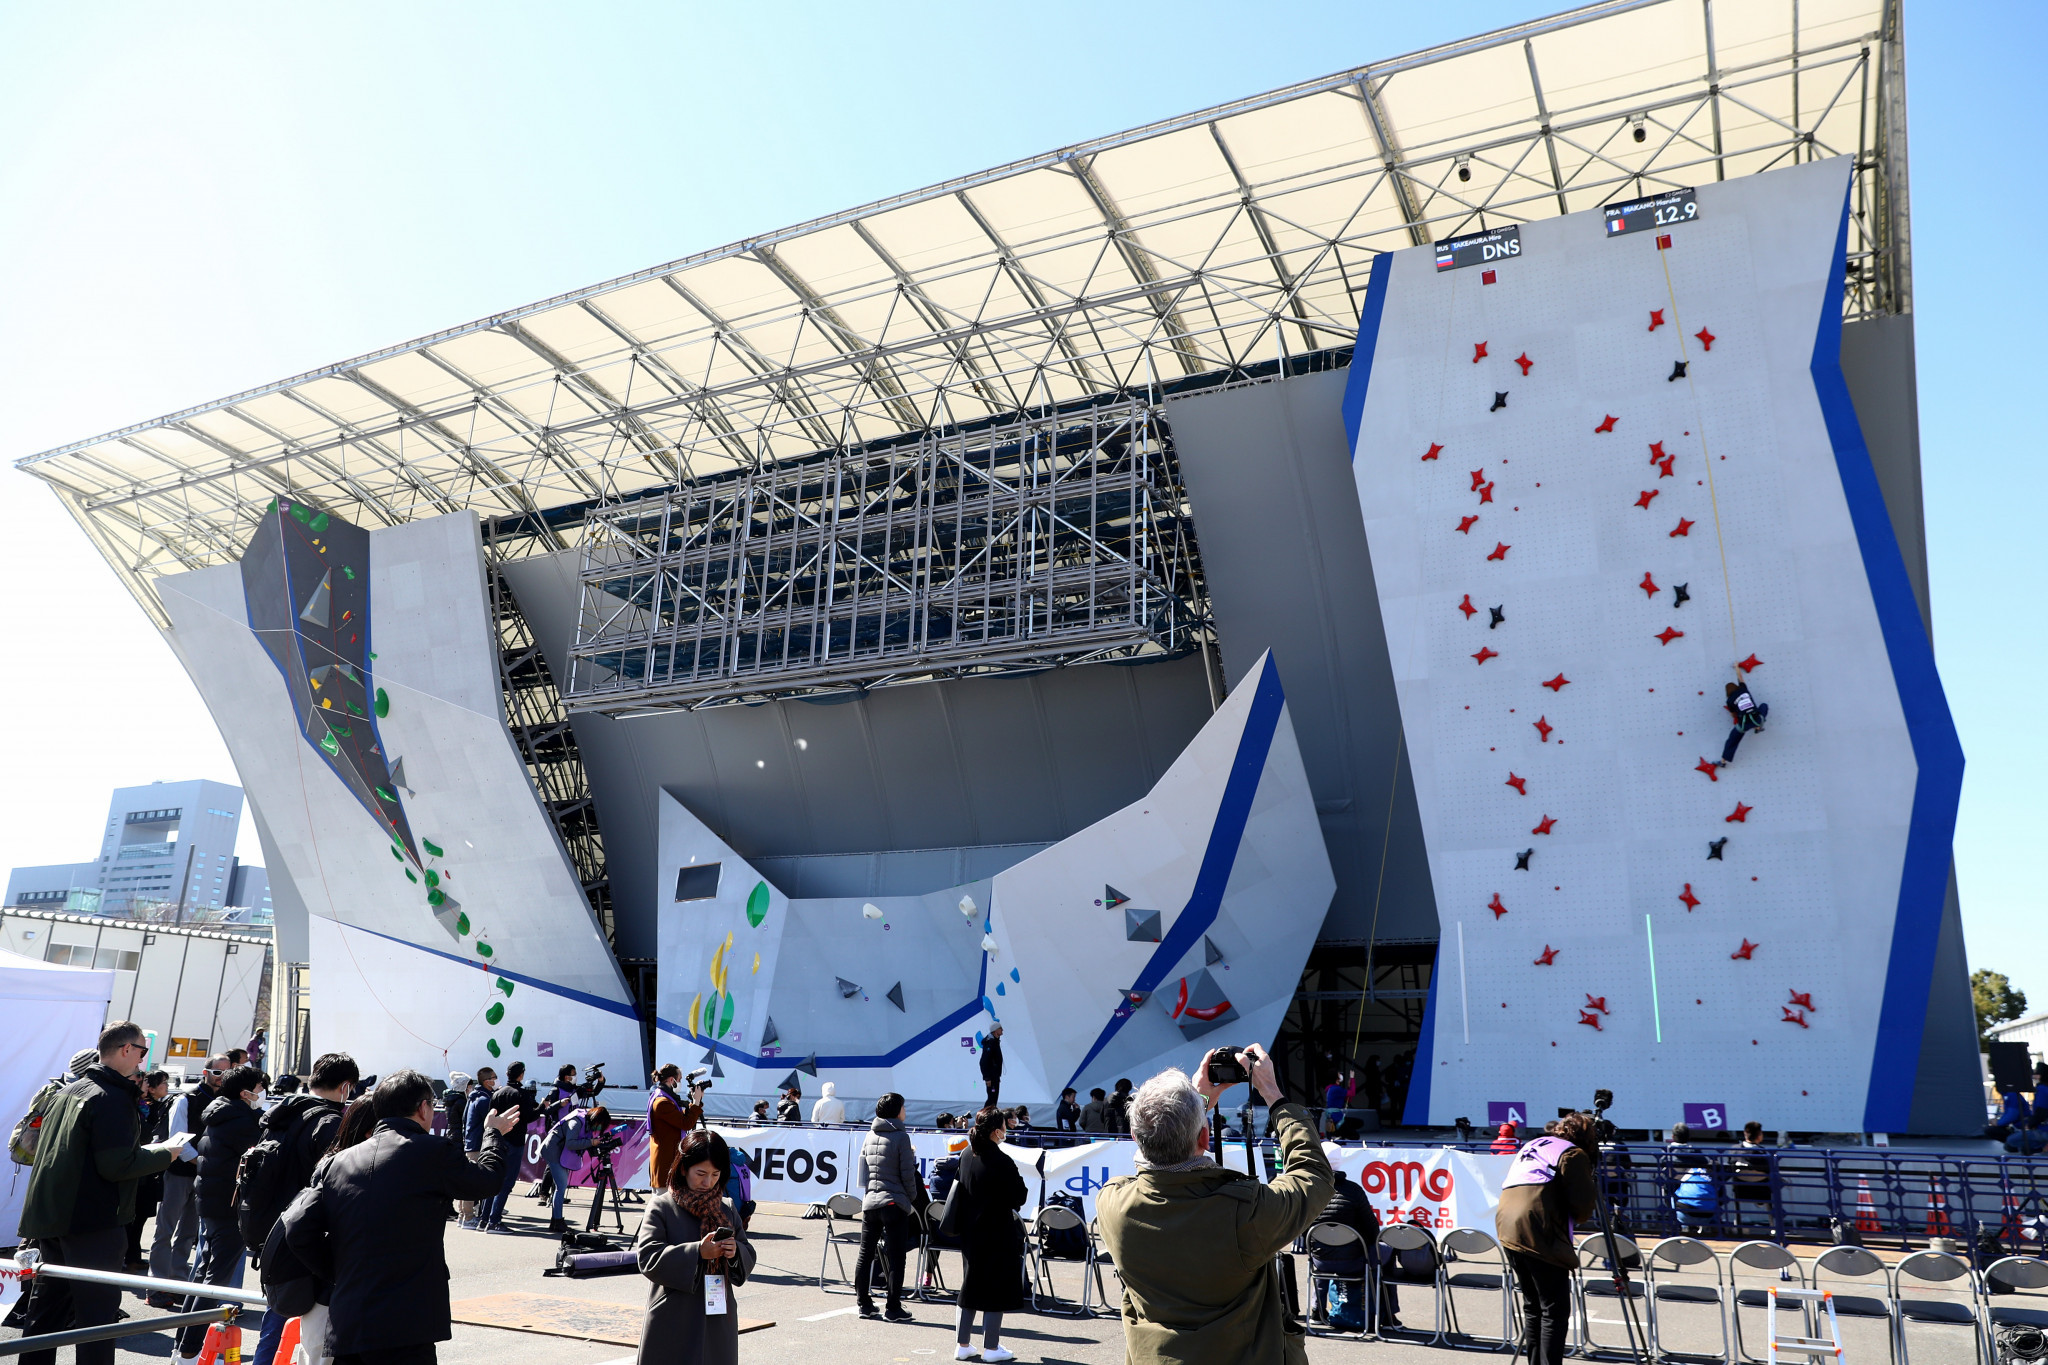 Sport climbing and 3x3 basketball competitions are due to take place at the venue ©Getty Images